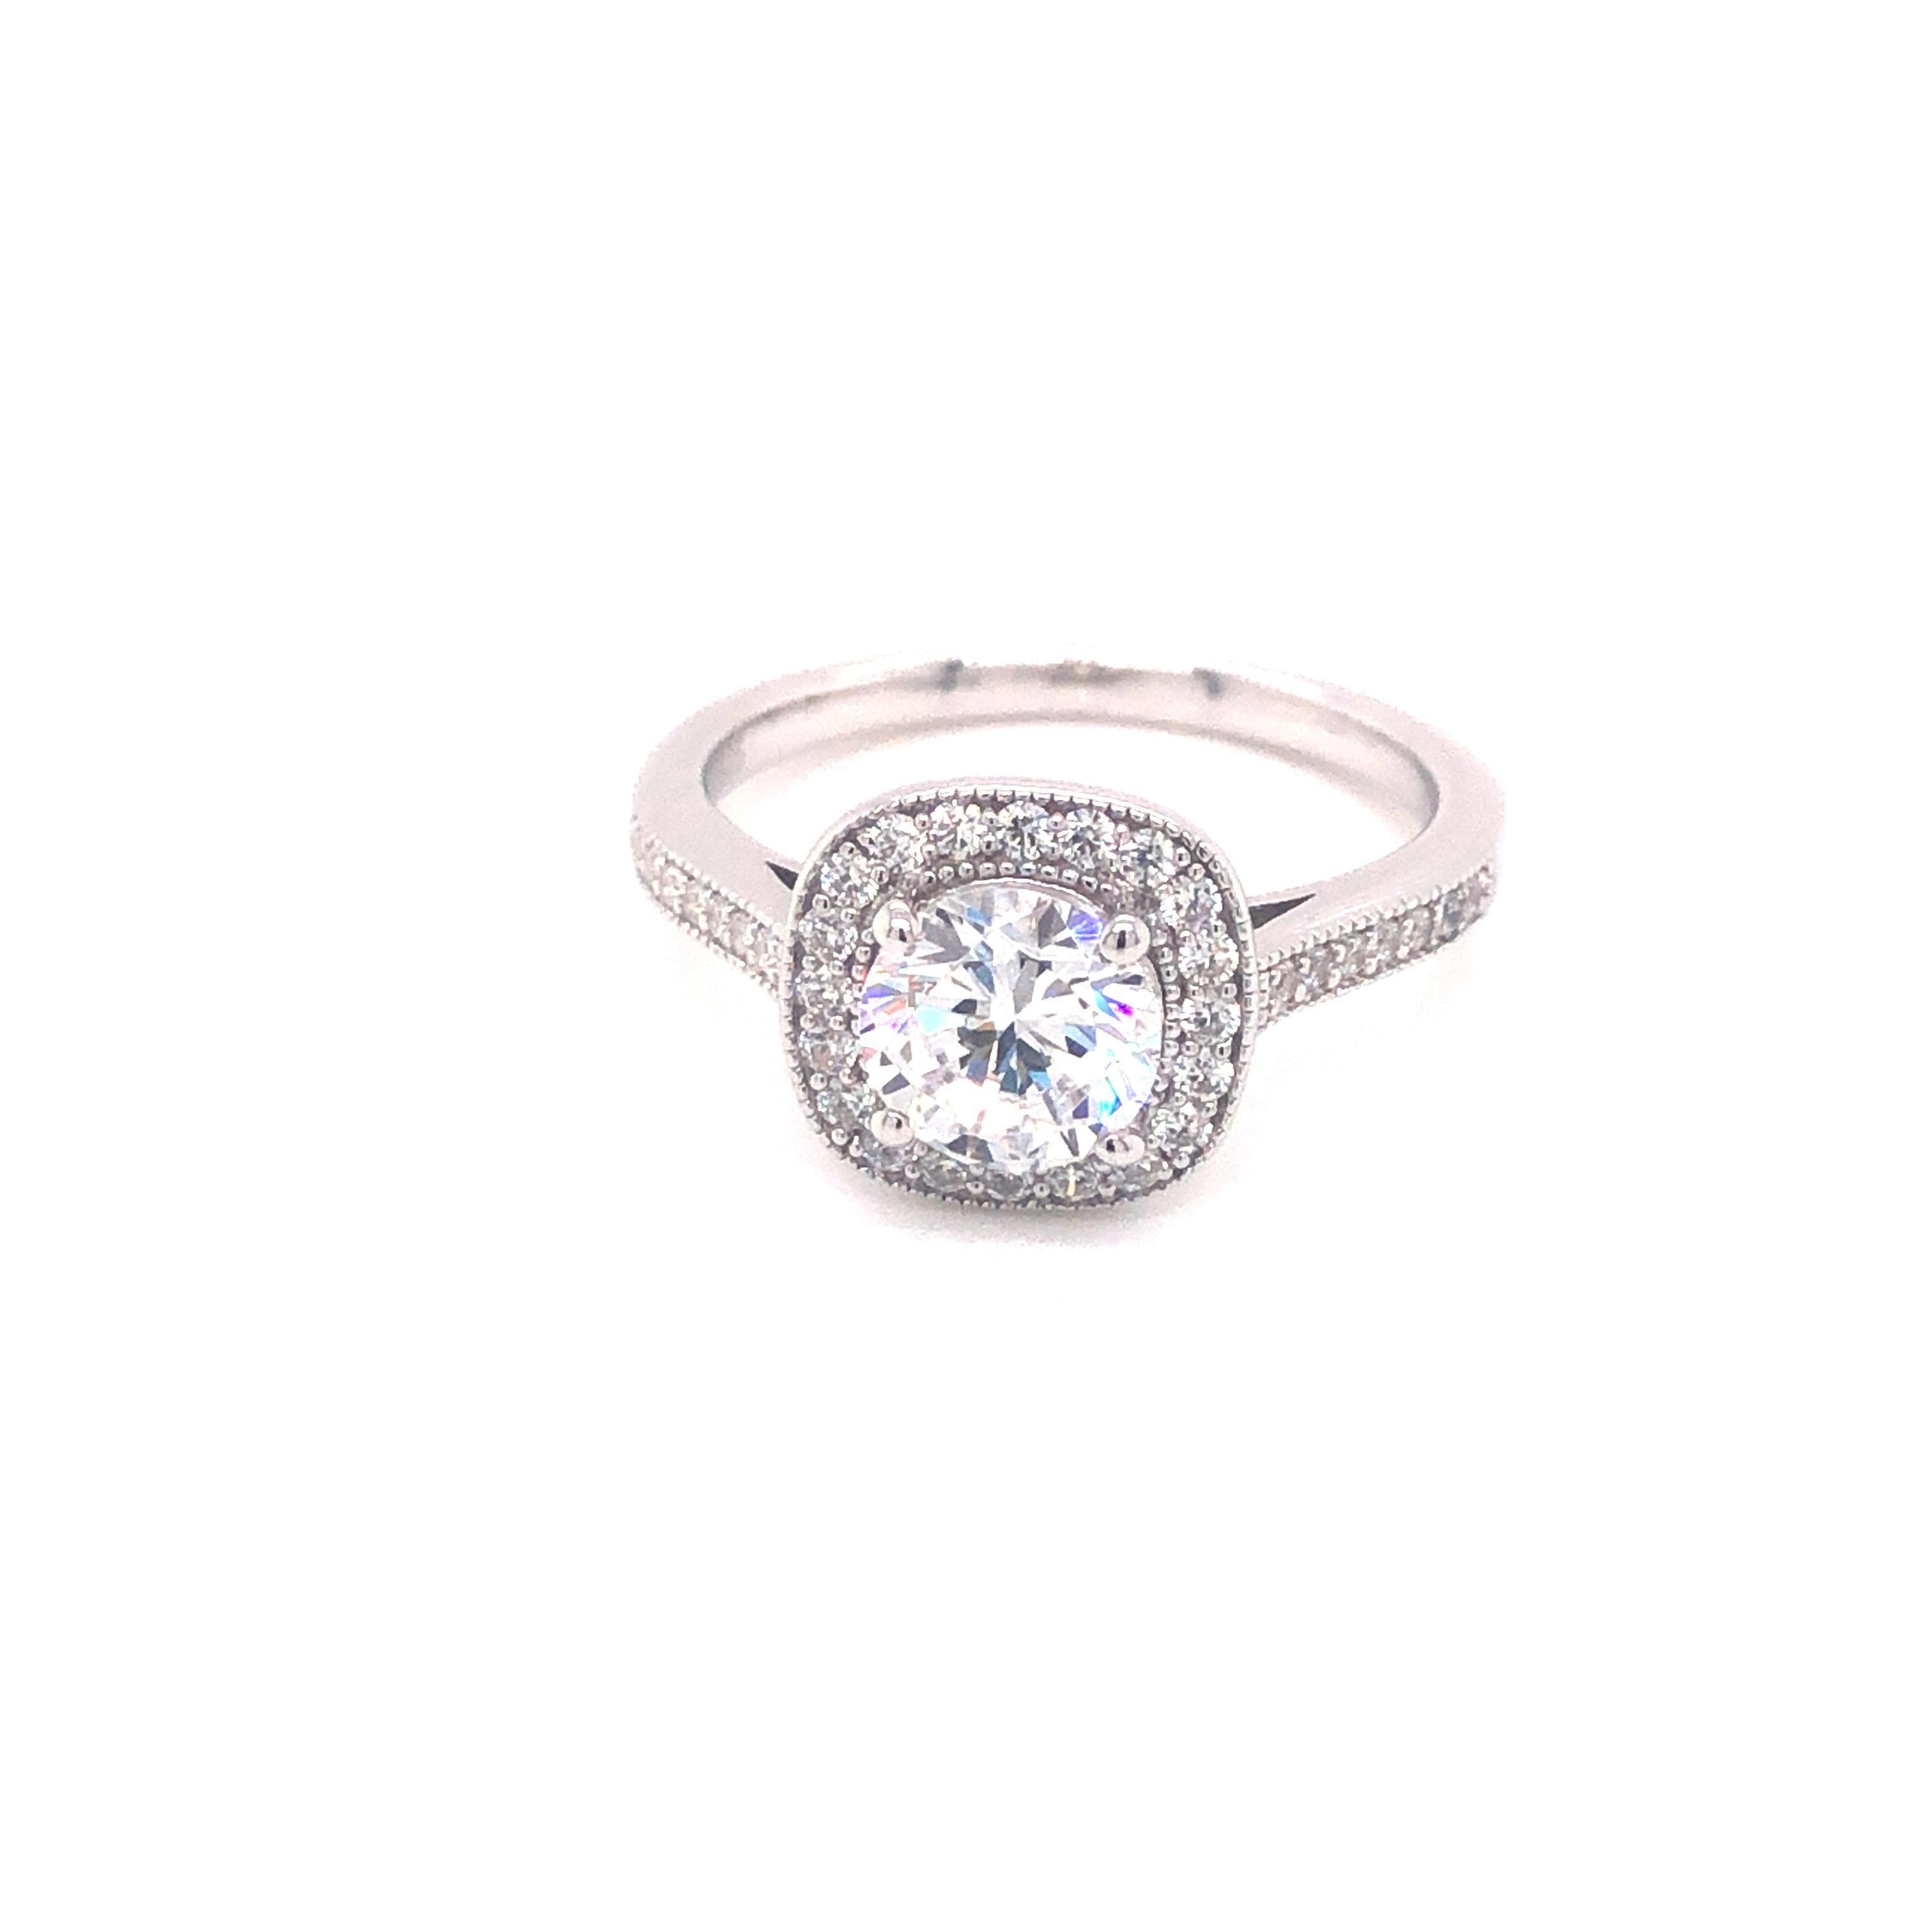 Embrace classic elegance with this vintage inspired ring. 

Featuring a 1.50ct round brilliant cutcubic zirconia, surrounded by 0.34 carat of cubic zirconia, set in 925 sterling silver with a highly polished platinum finish.

Whether you're looking